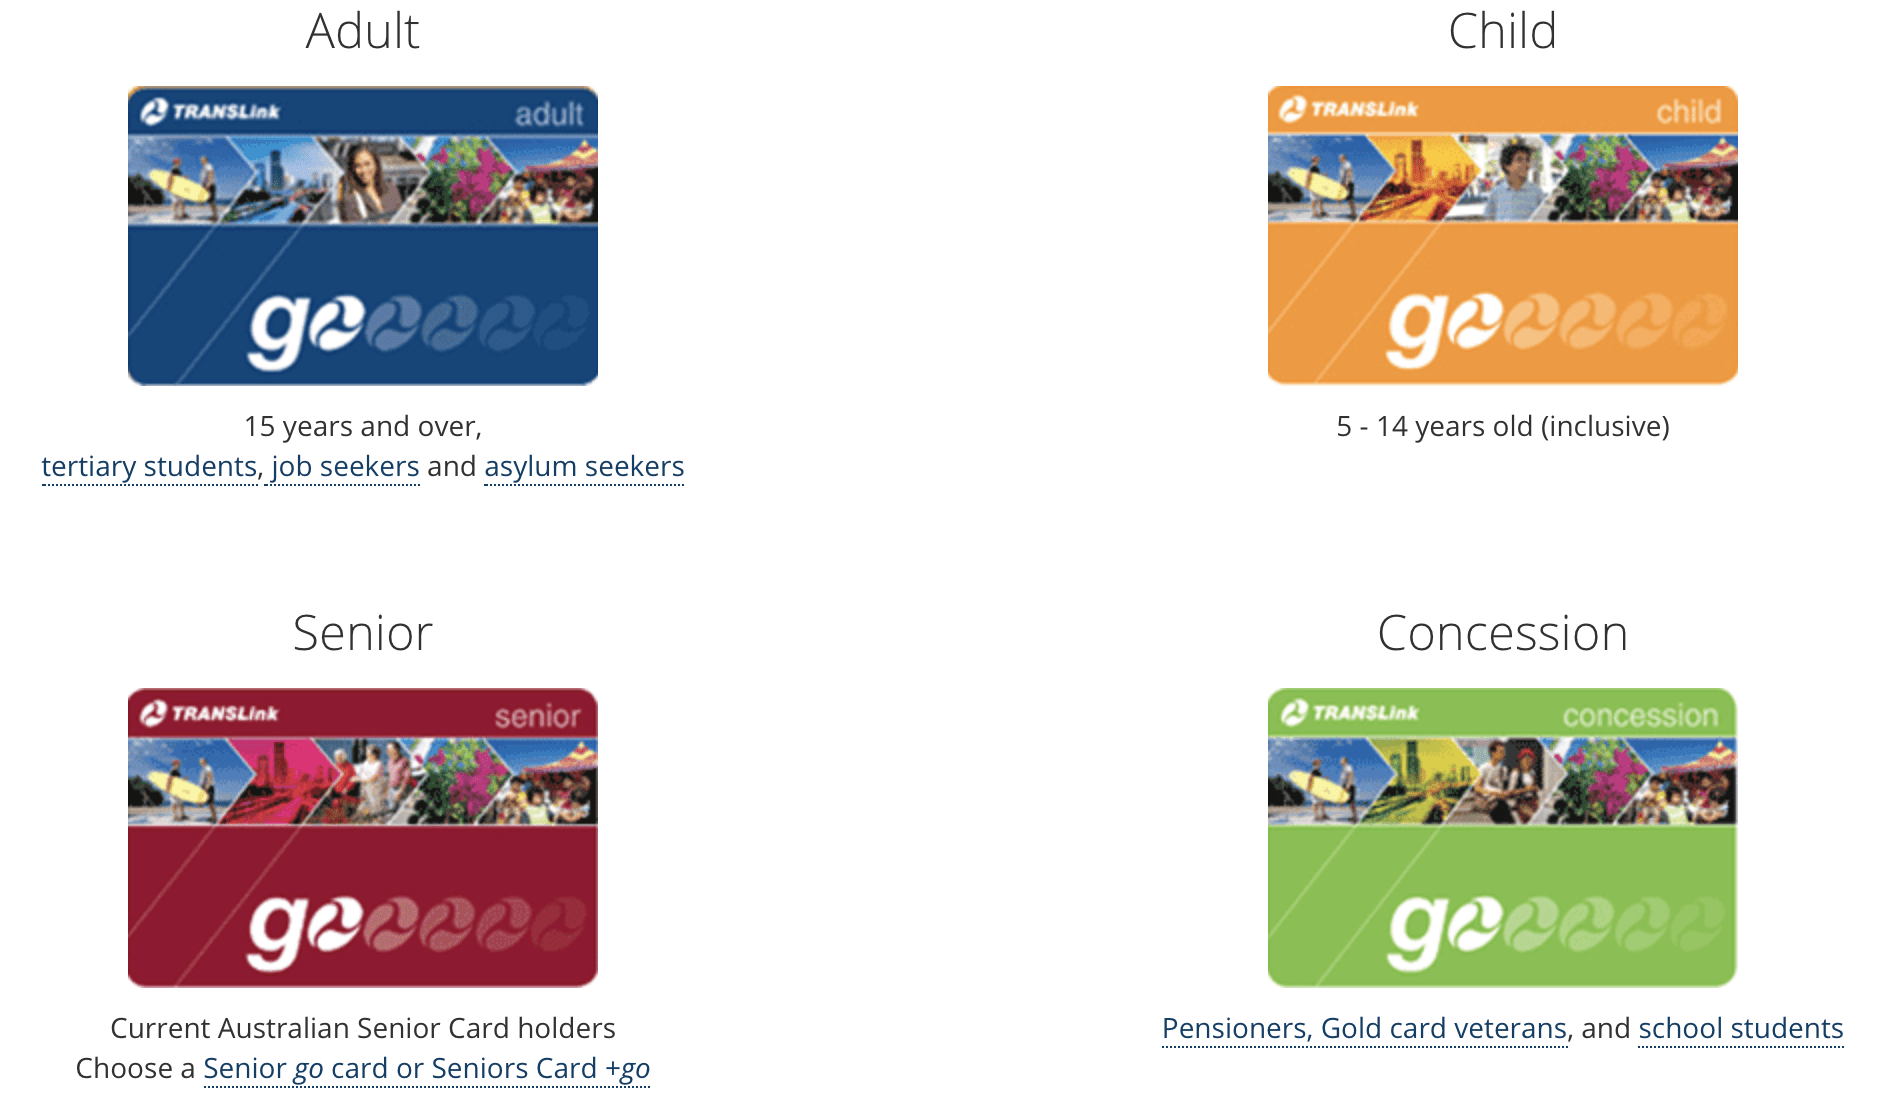 https://translink.com.au/tickets-and-fares/go-card/about-go-card